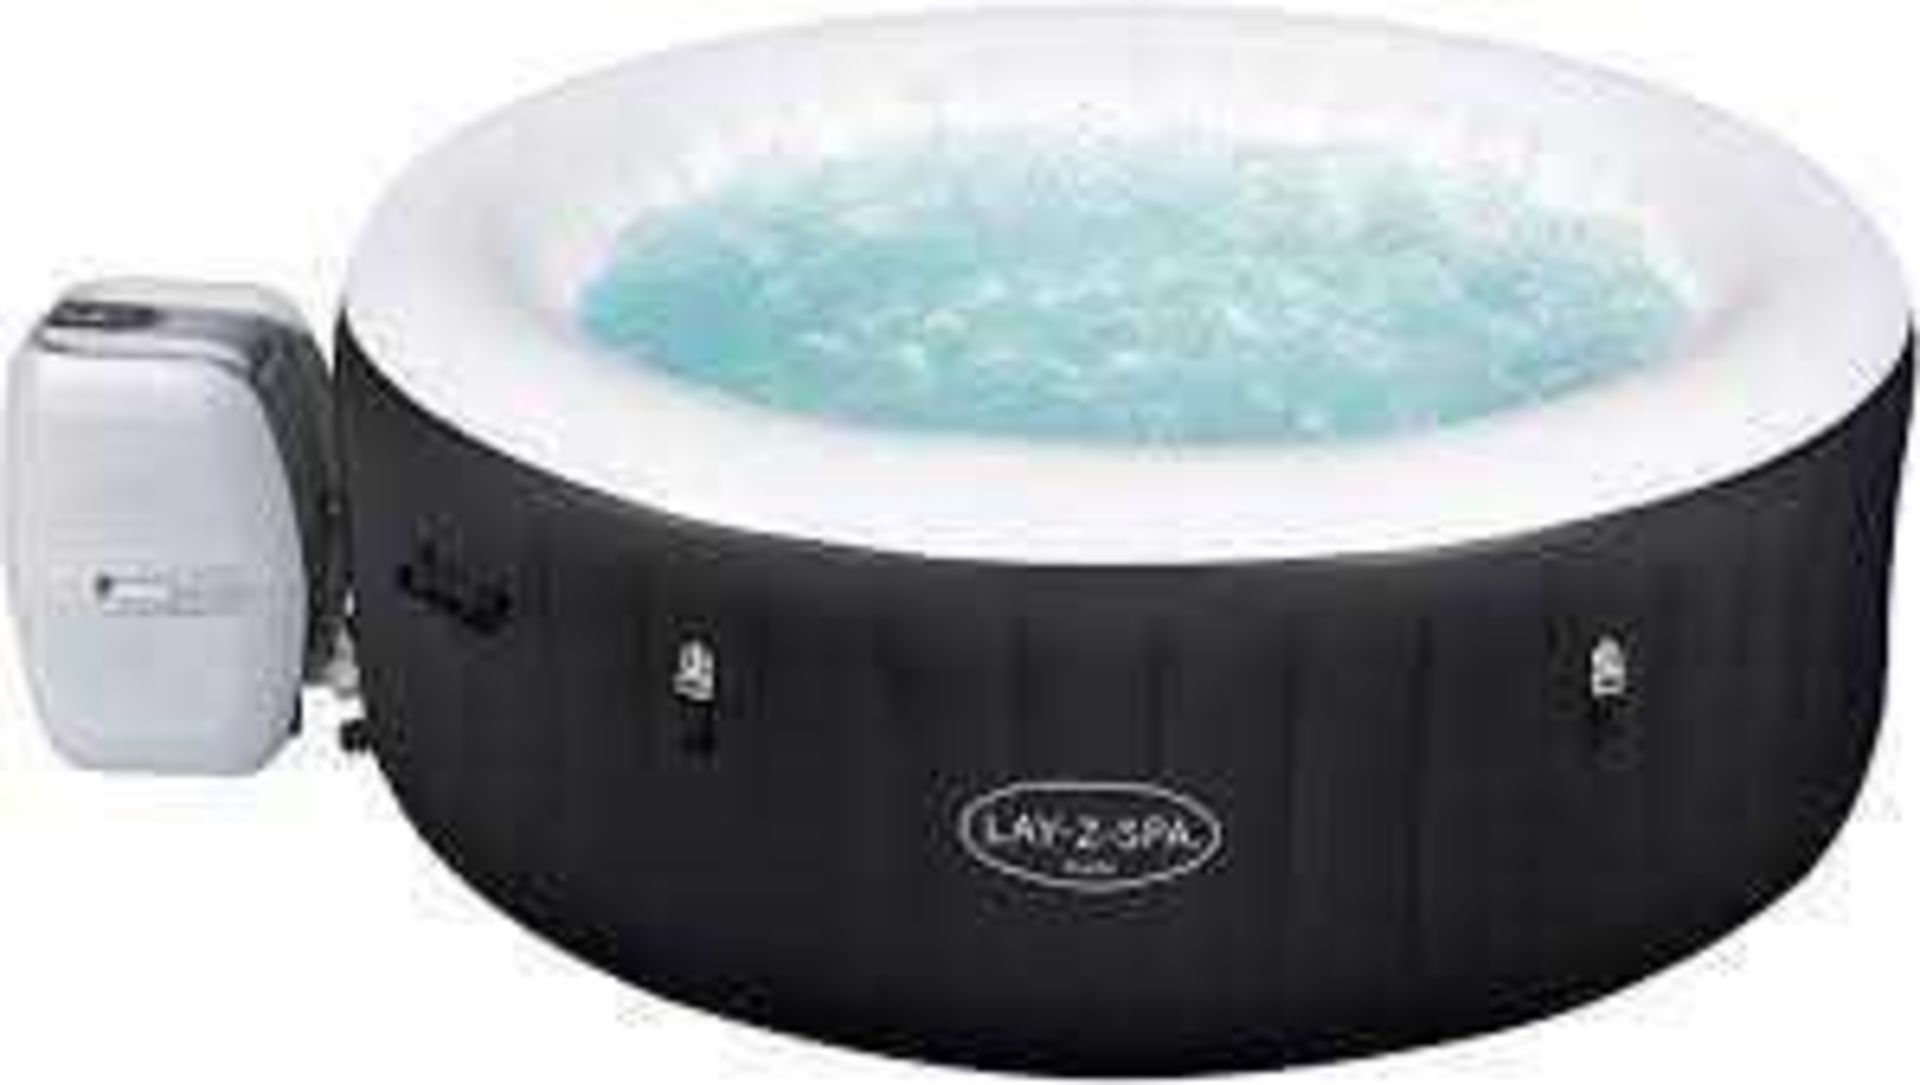 RRP £500 Boxed Lazi Spa Miami Portable Hot Tub (117062) (Appraisals Are Available On Request) (